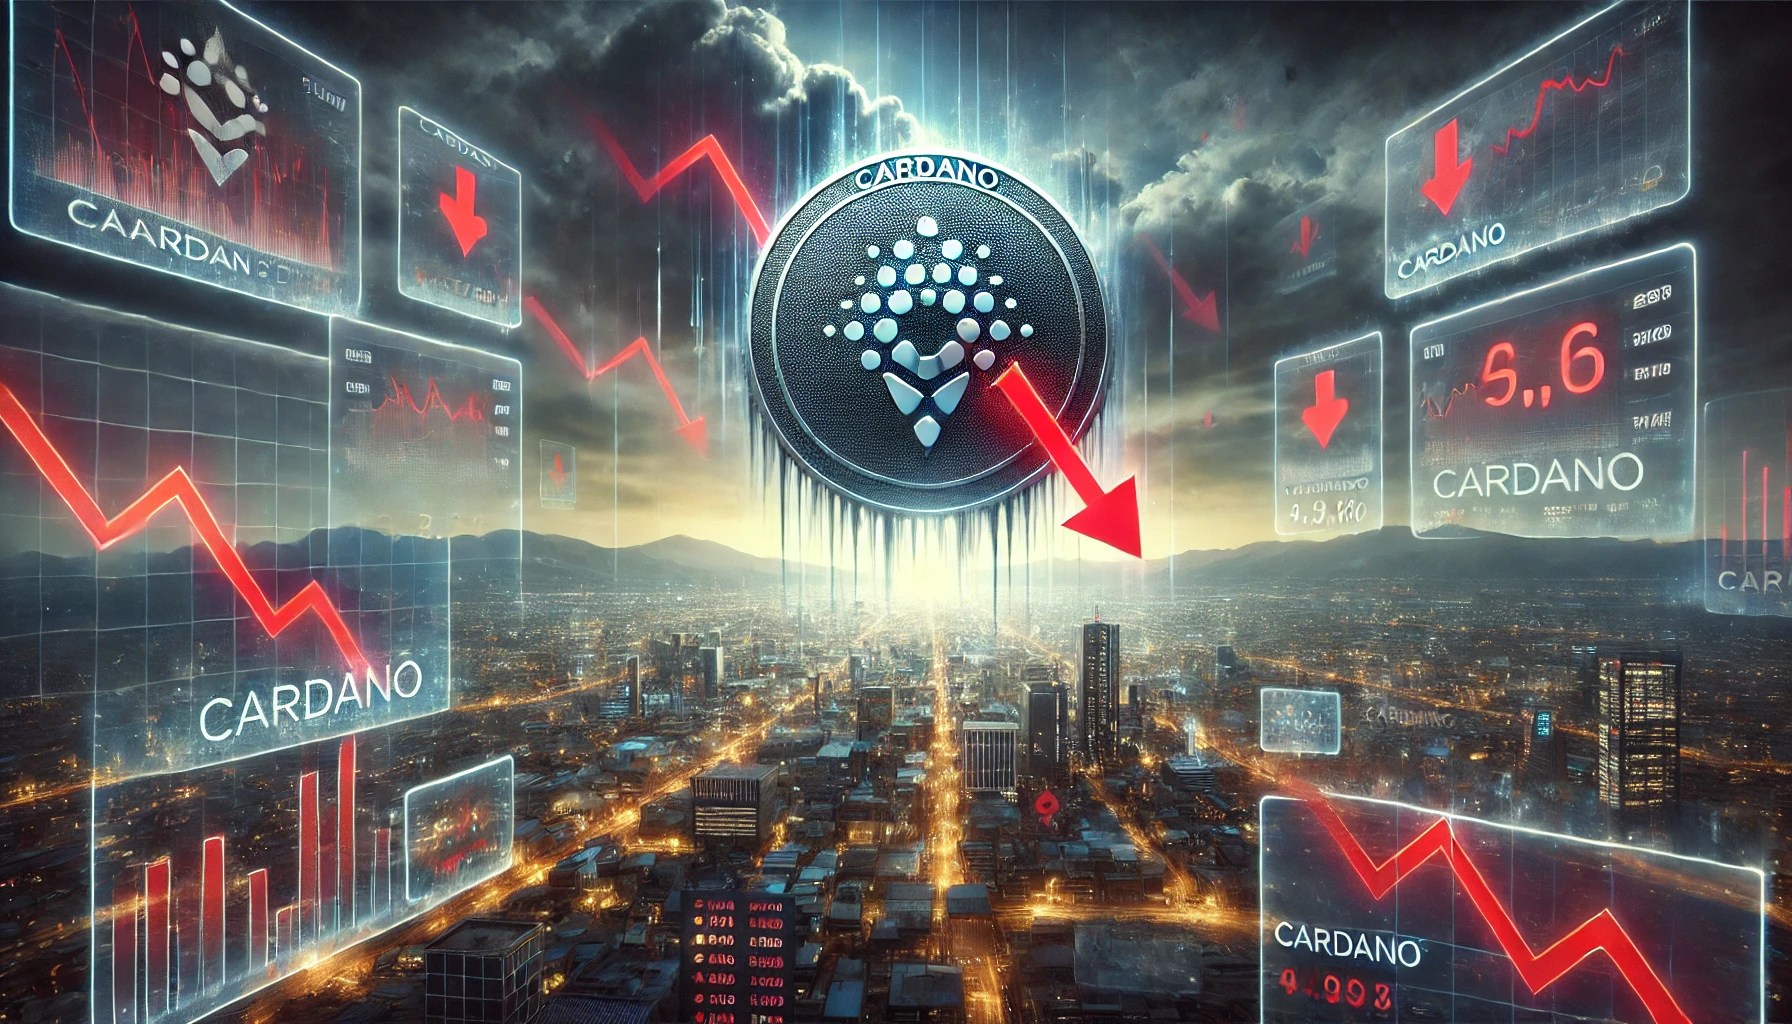 Cardano Loses Top Spot For Network With The Most Development – Here’s The New Leader